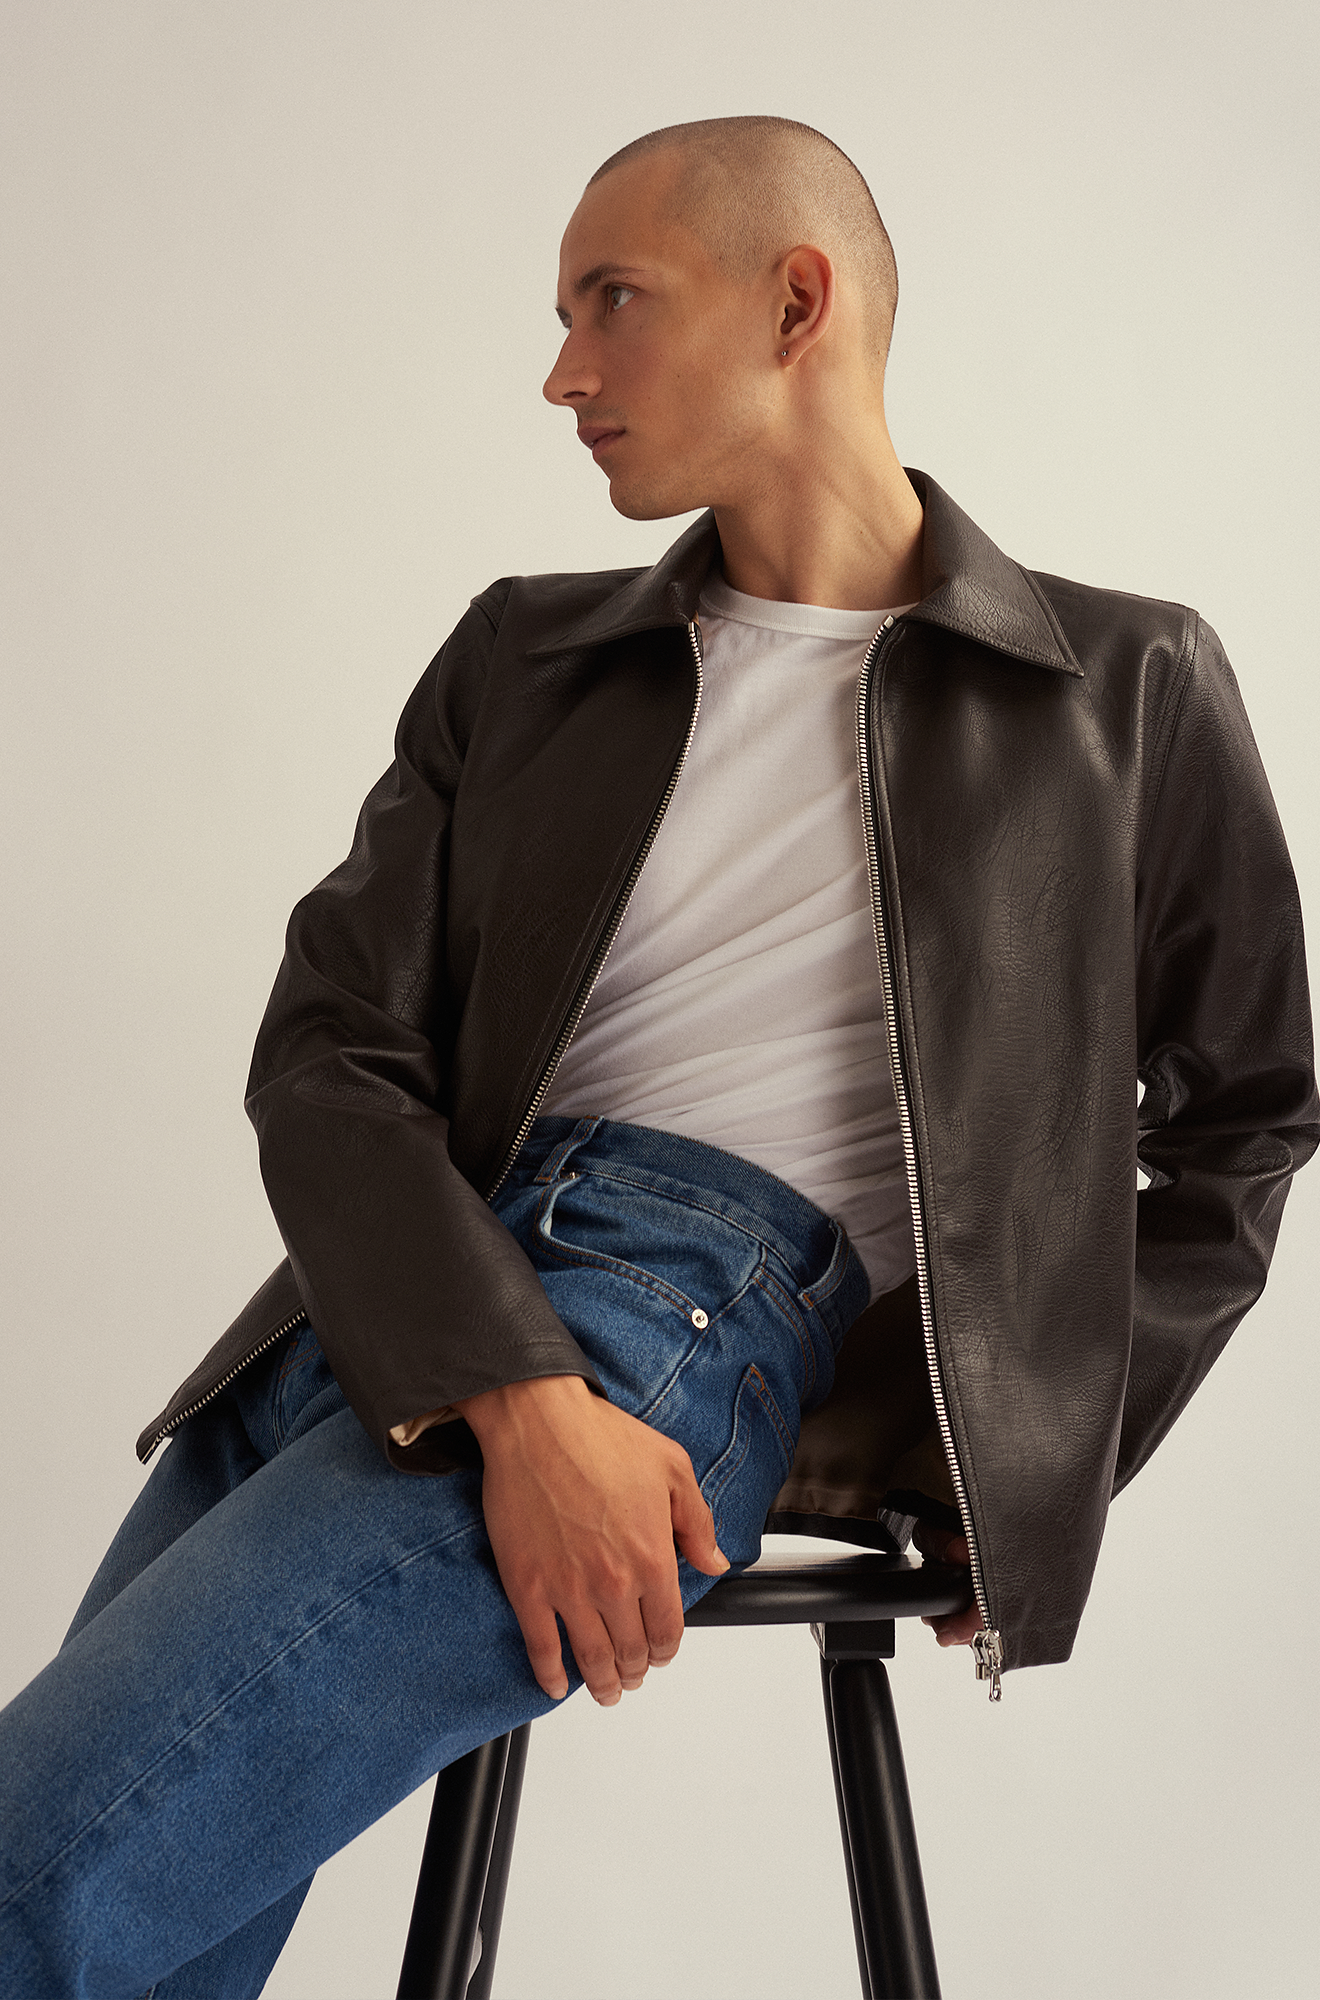 Shop new arrivals from Sefr at Zoovillage, leather jackets, jeans t-shirts